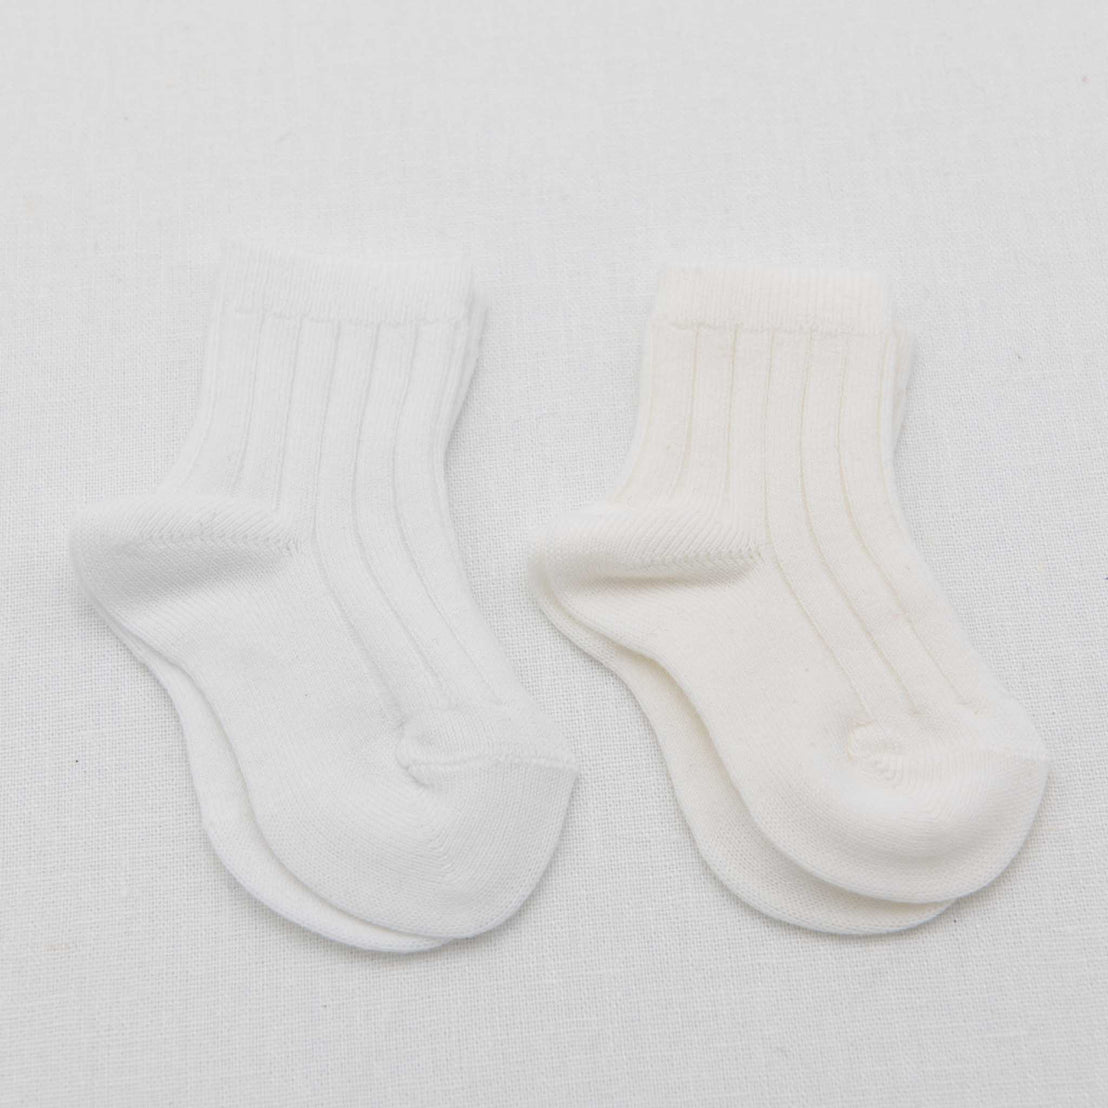 A pair of white vintage Ribbed Socks with ribbed cuffs laid flat on a white textured background.